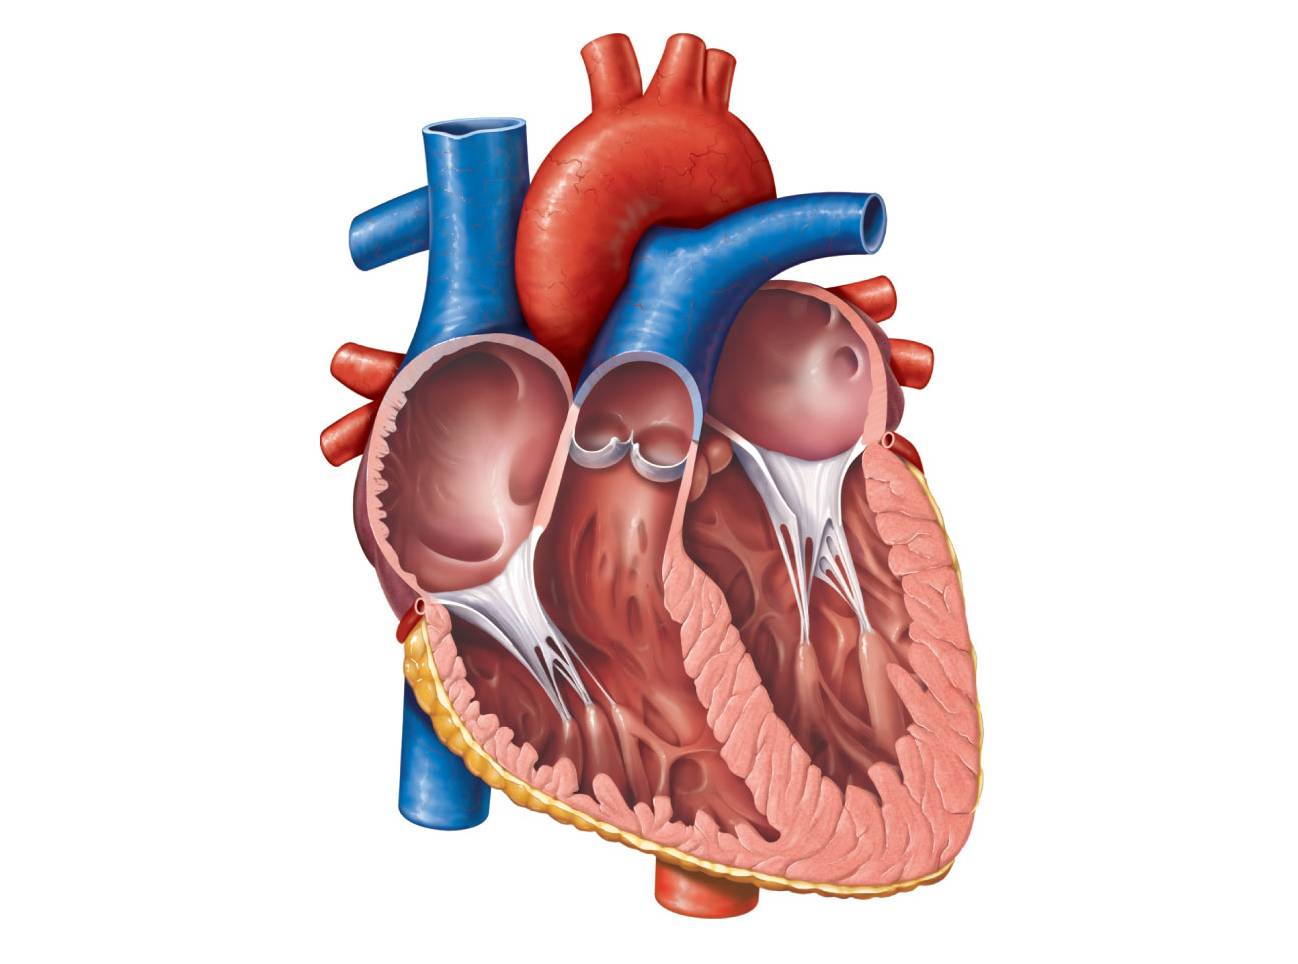 Heart Diagram Unlabeled - Cliparts.co